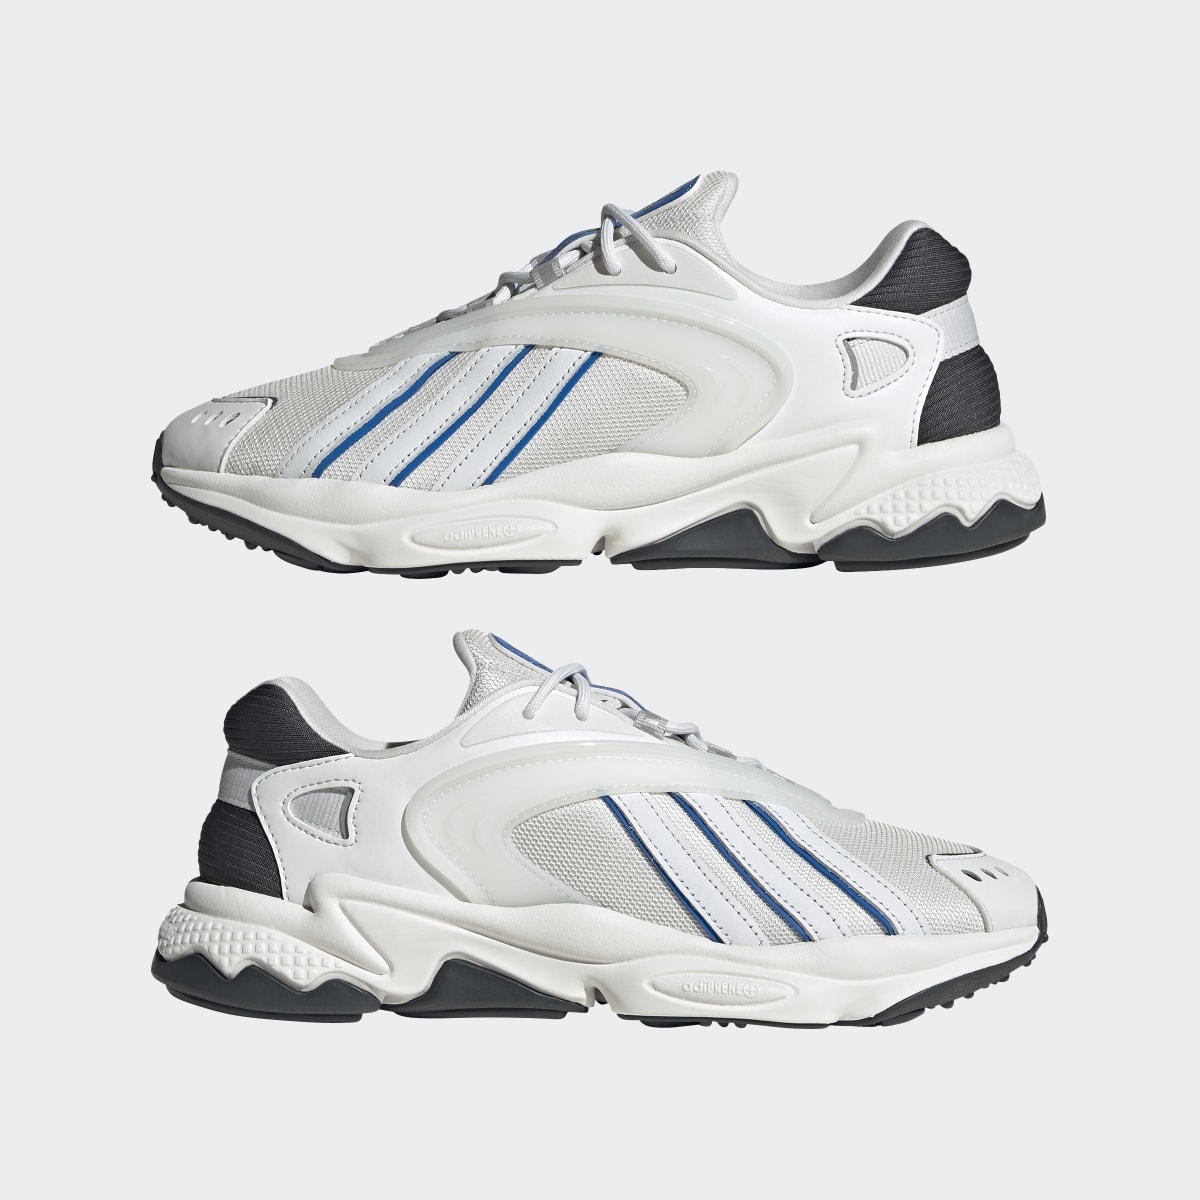 Adidas Chaussure Oztral. 11